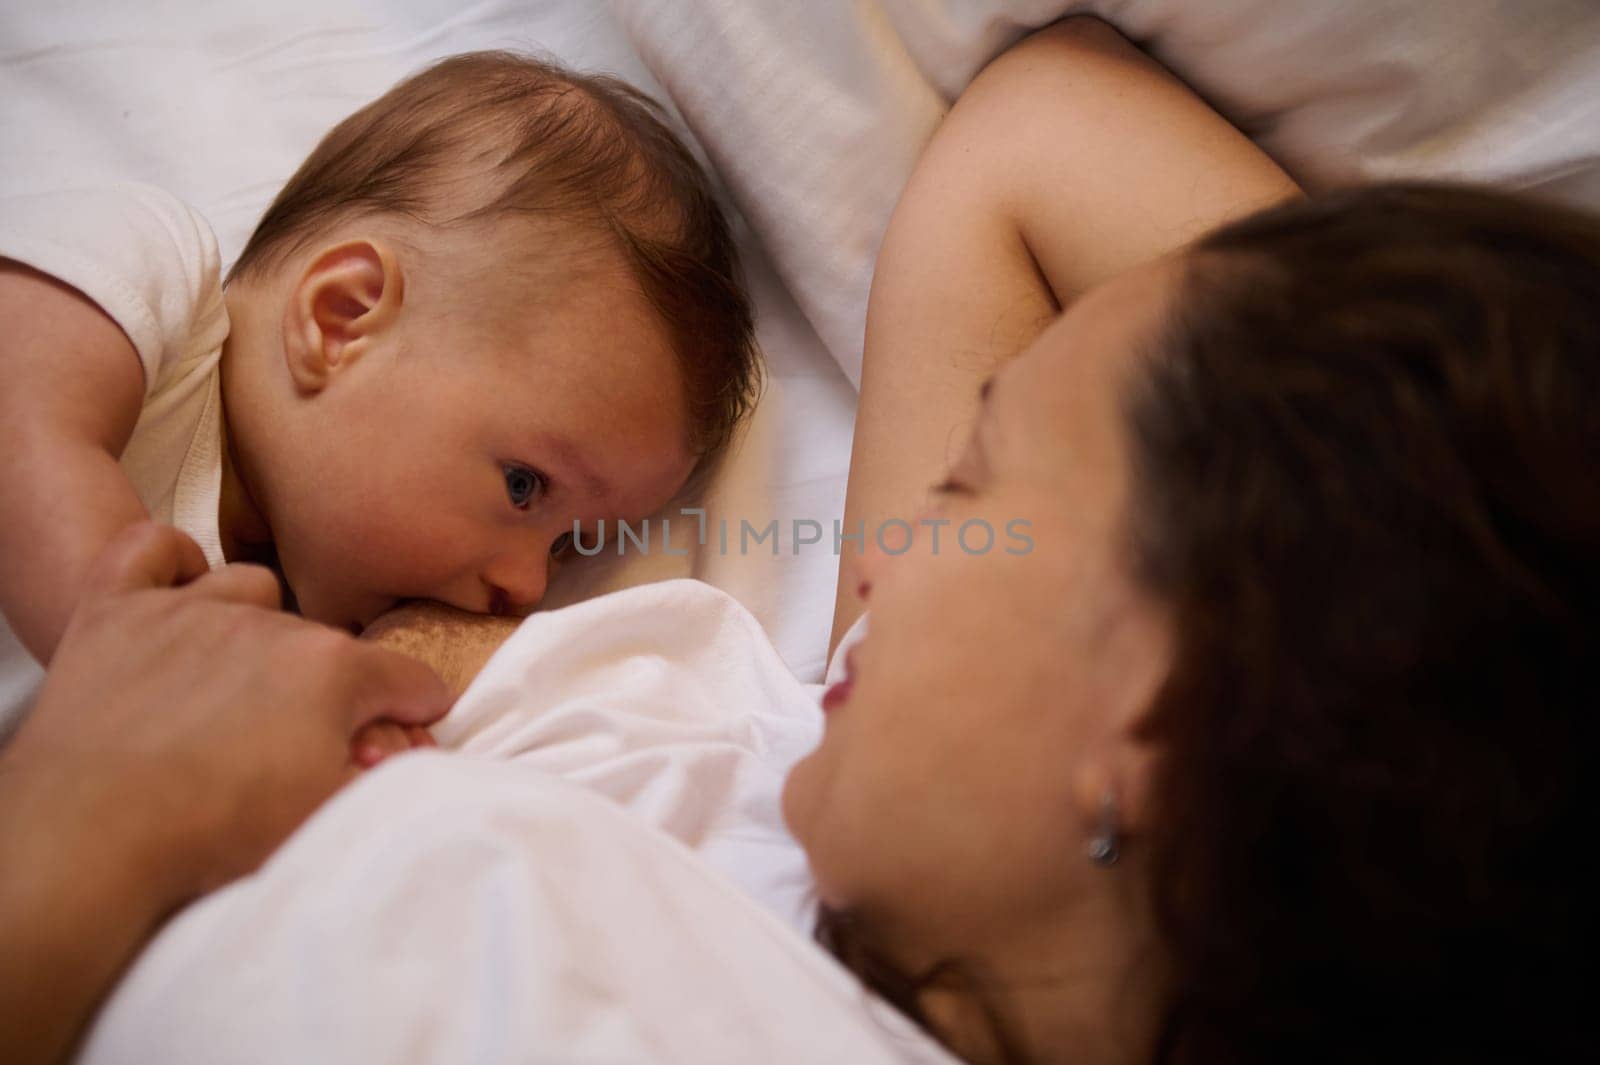 Authentic portrait of a newborn baby boy sucking milk from mothers breast. Portrait of mom and breastfeeding baby. Healthy lifestyle. Infancy and maternity concept. Mother's milk - best kids nutrition